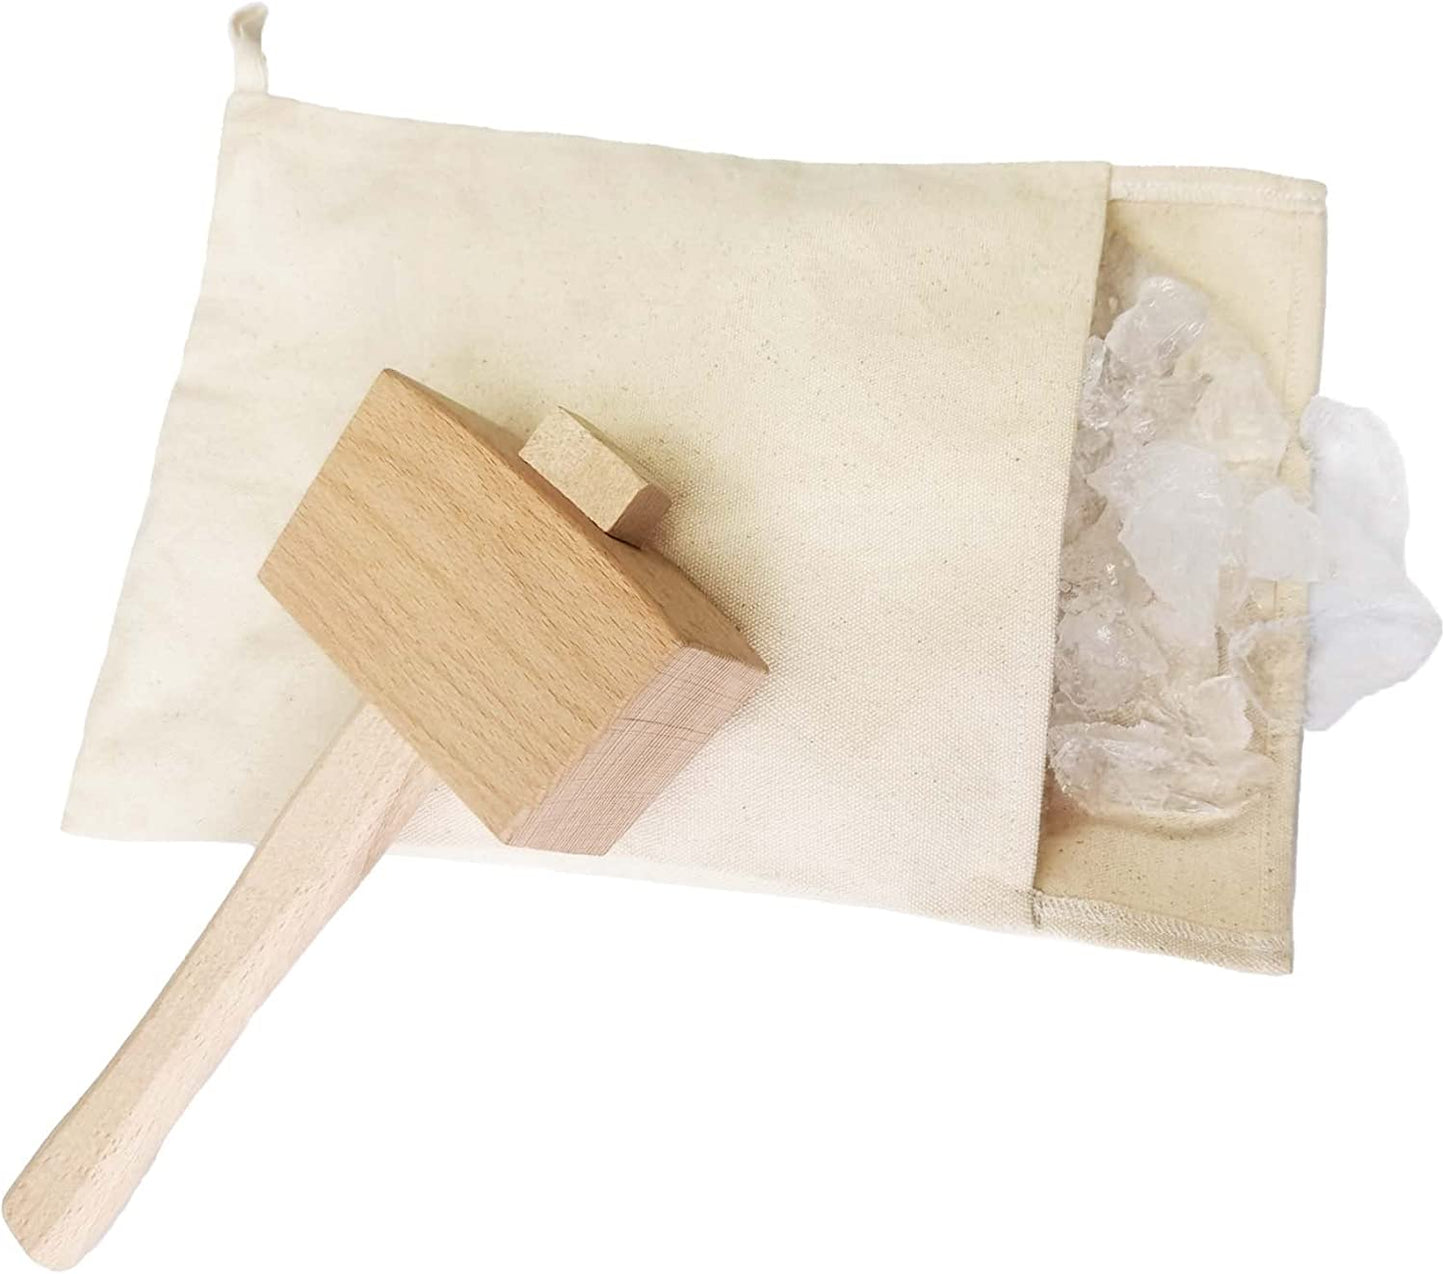 Lewis Bag and Ice Mallet,Ice Scoop and Clip,Manual Ice Crusher,Thick Canvas,Beech Wooden Mallet,Stainless Steel,Crushed Ice,Bar Tools Kitchen Accessories, 4 Pcs Set